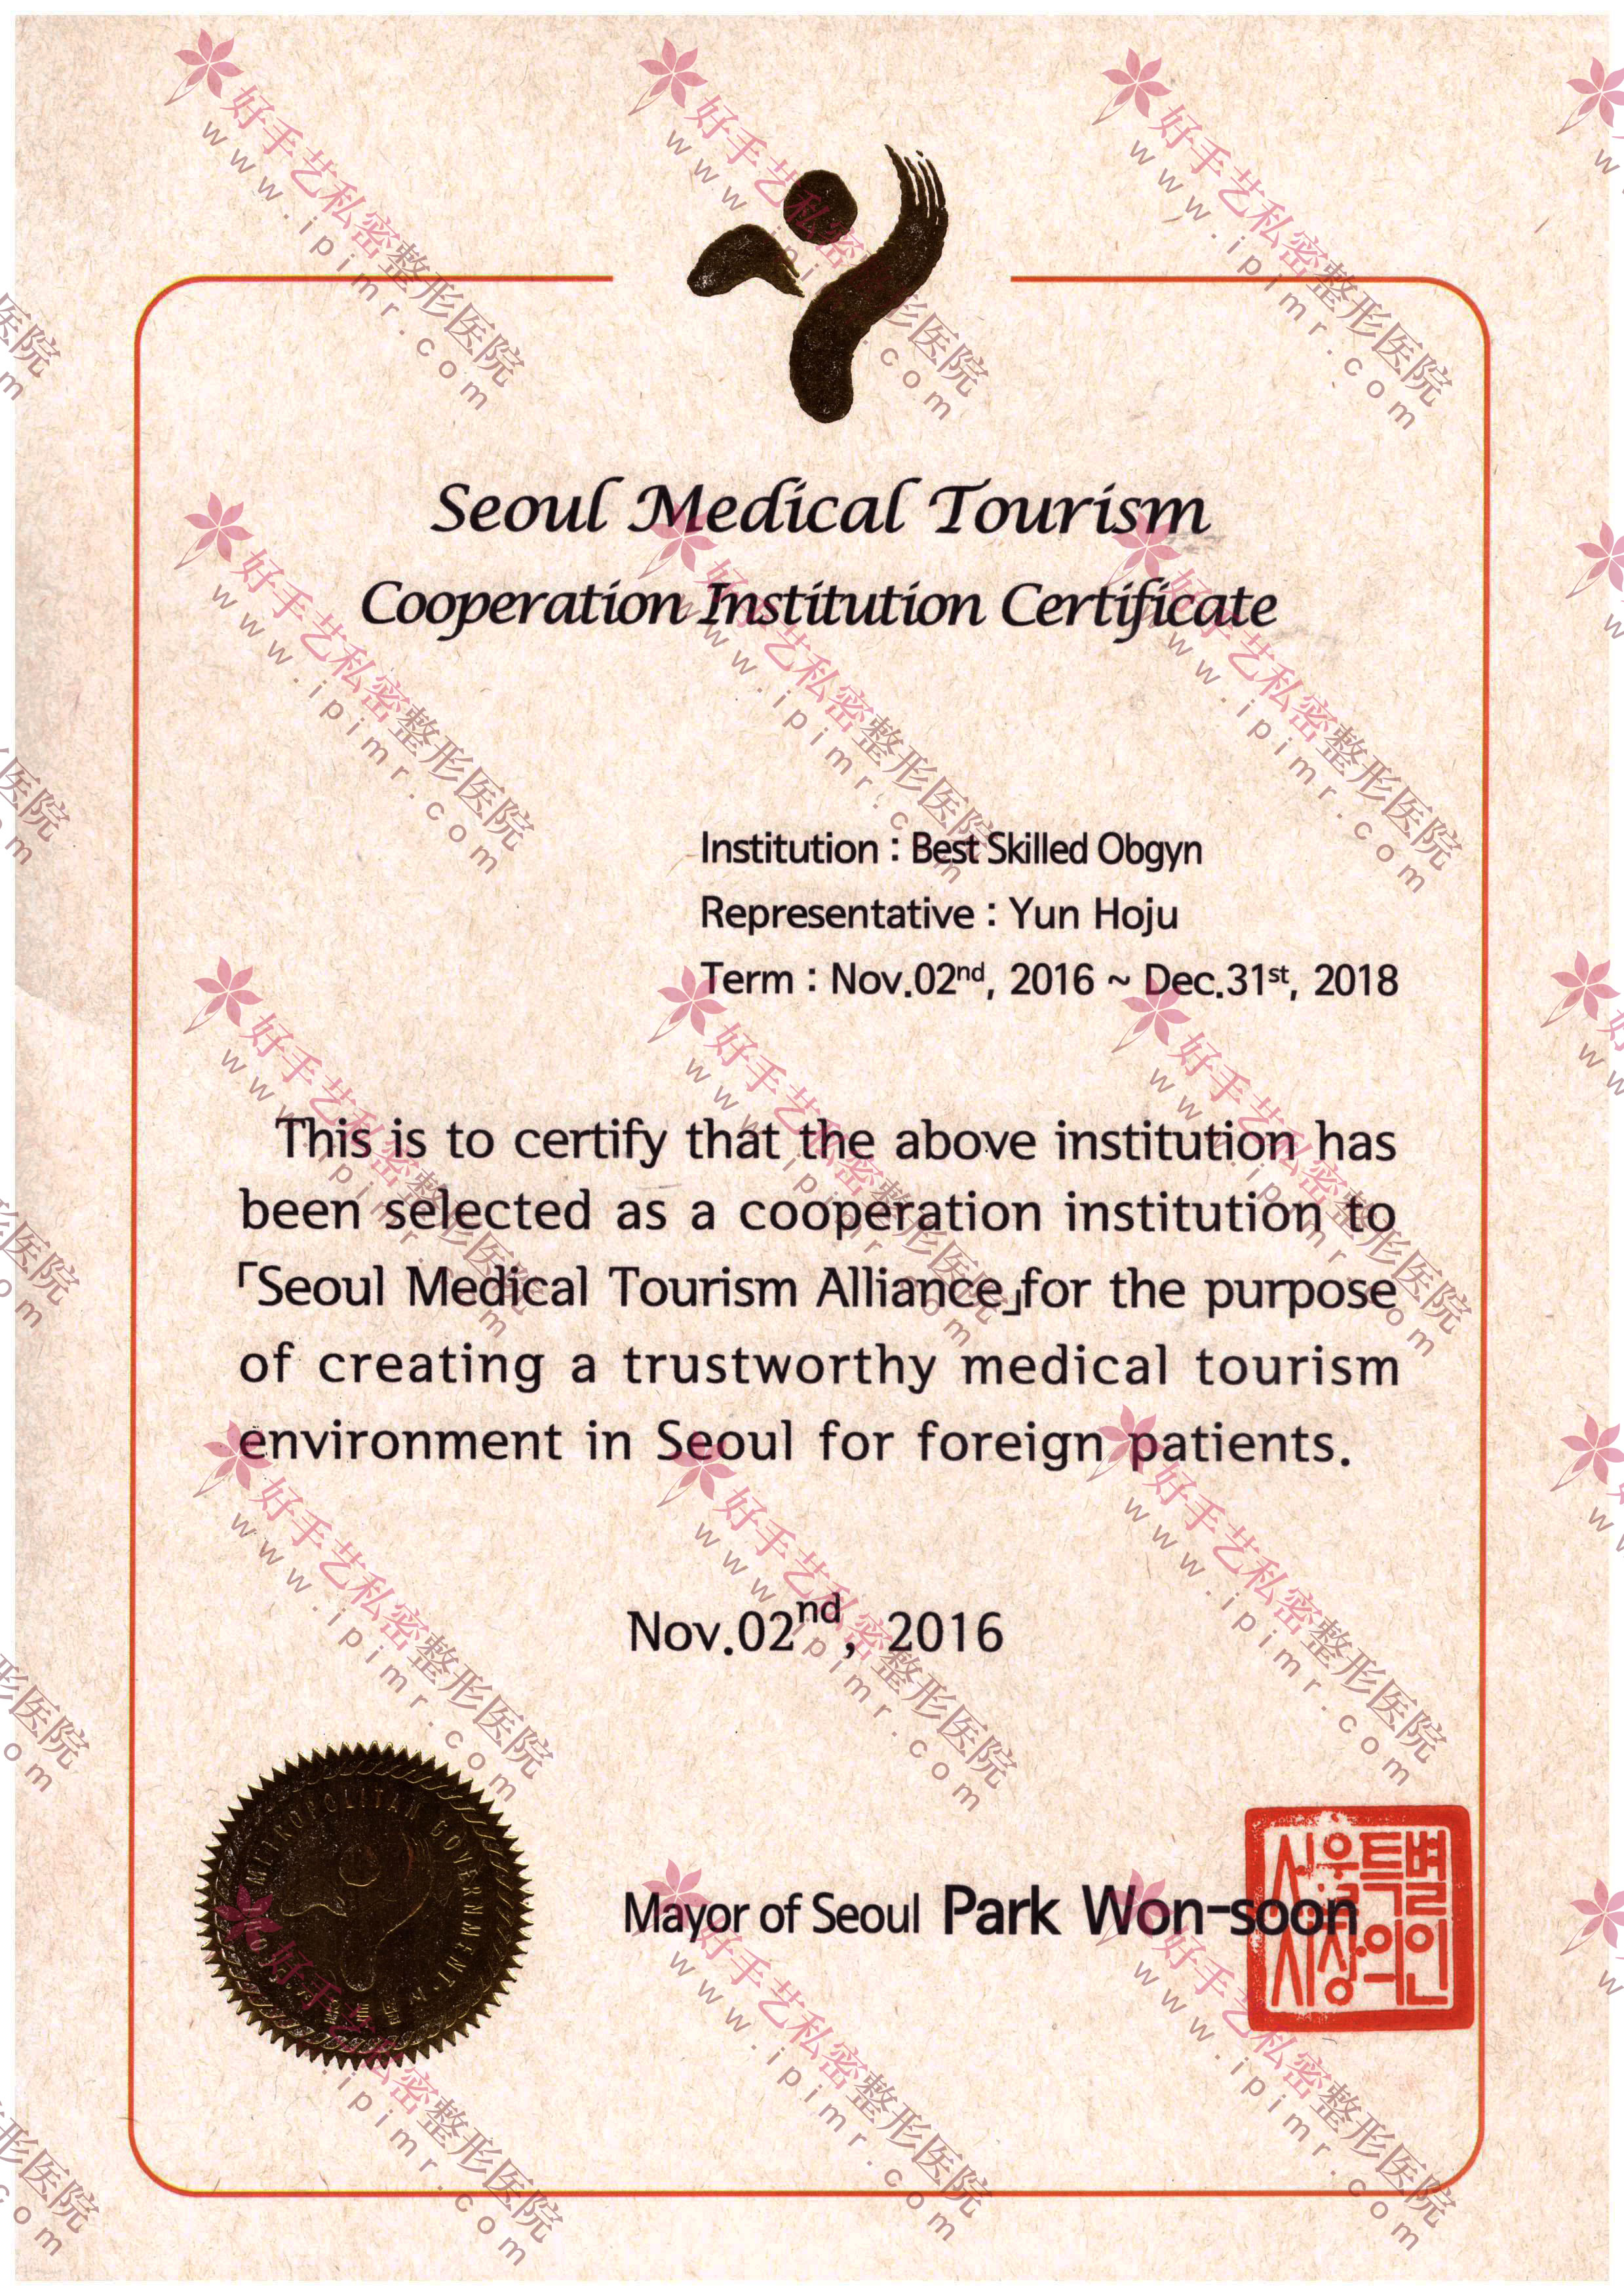 Seoul Medical Tourism Cooperation Institution Certificate